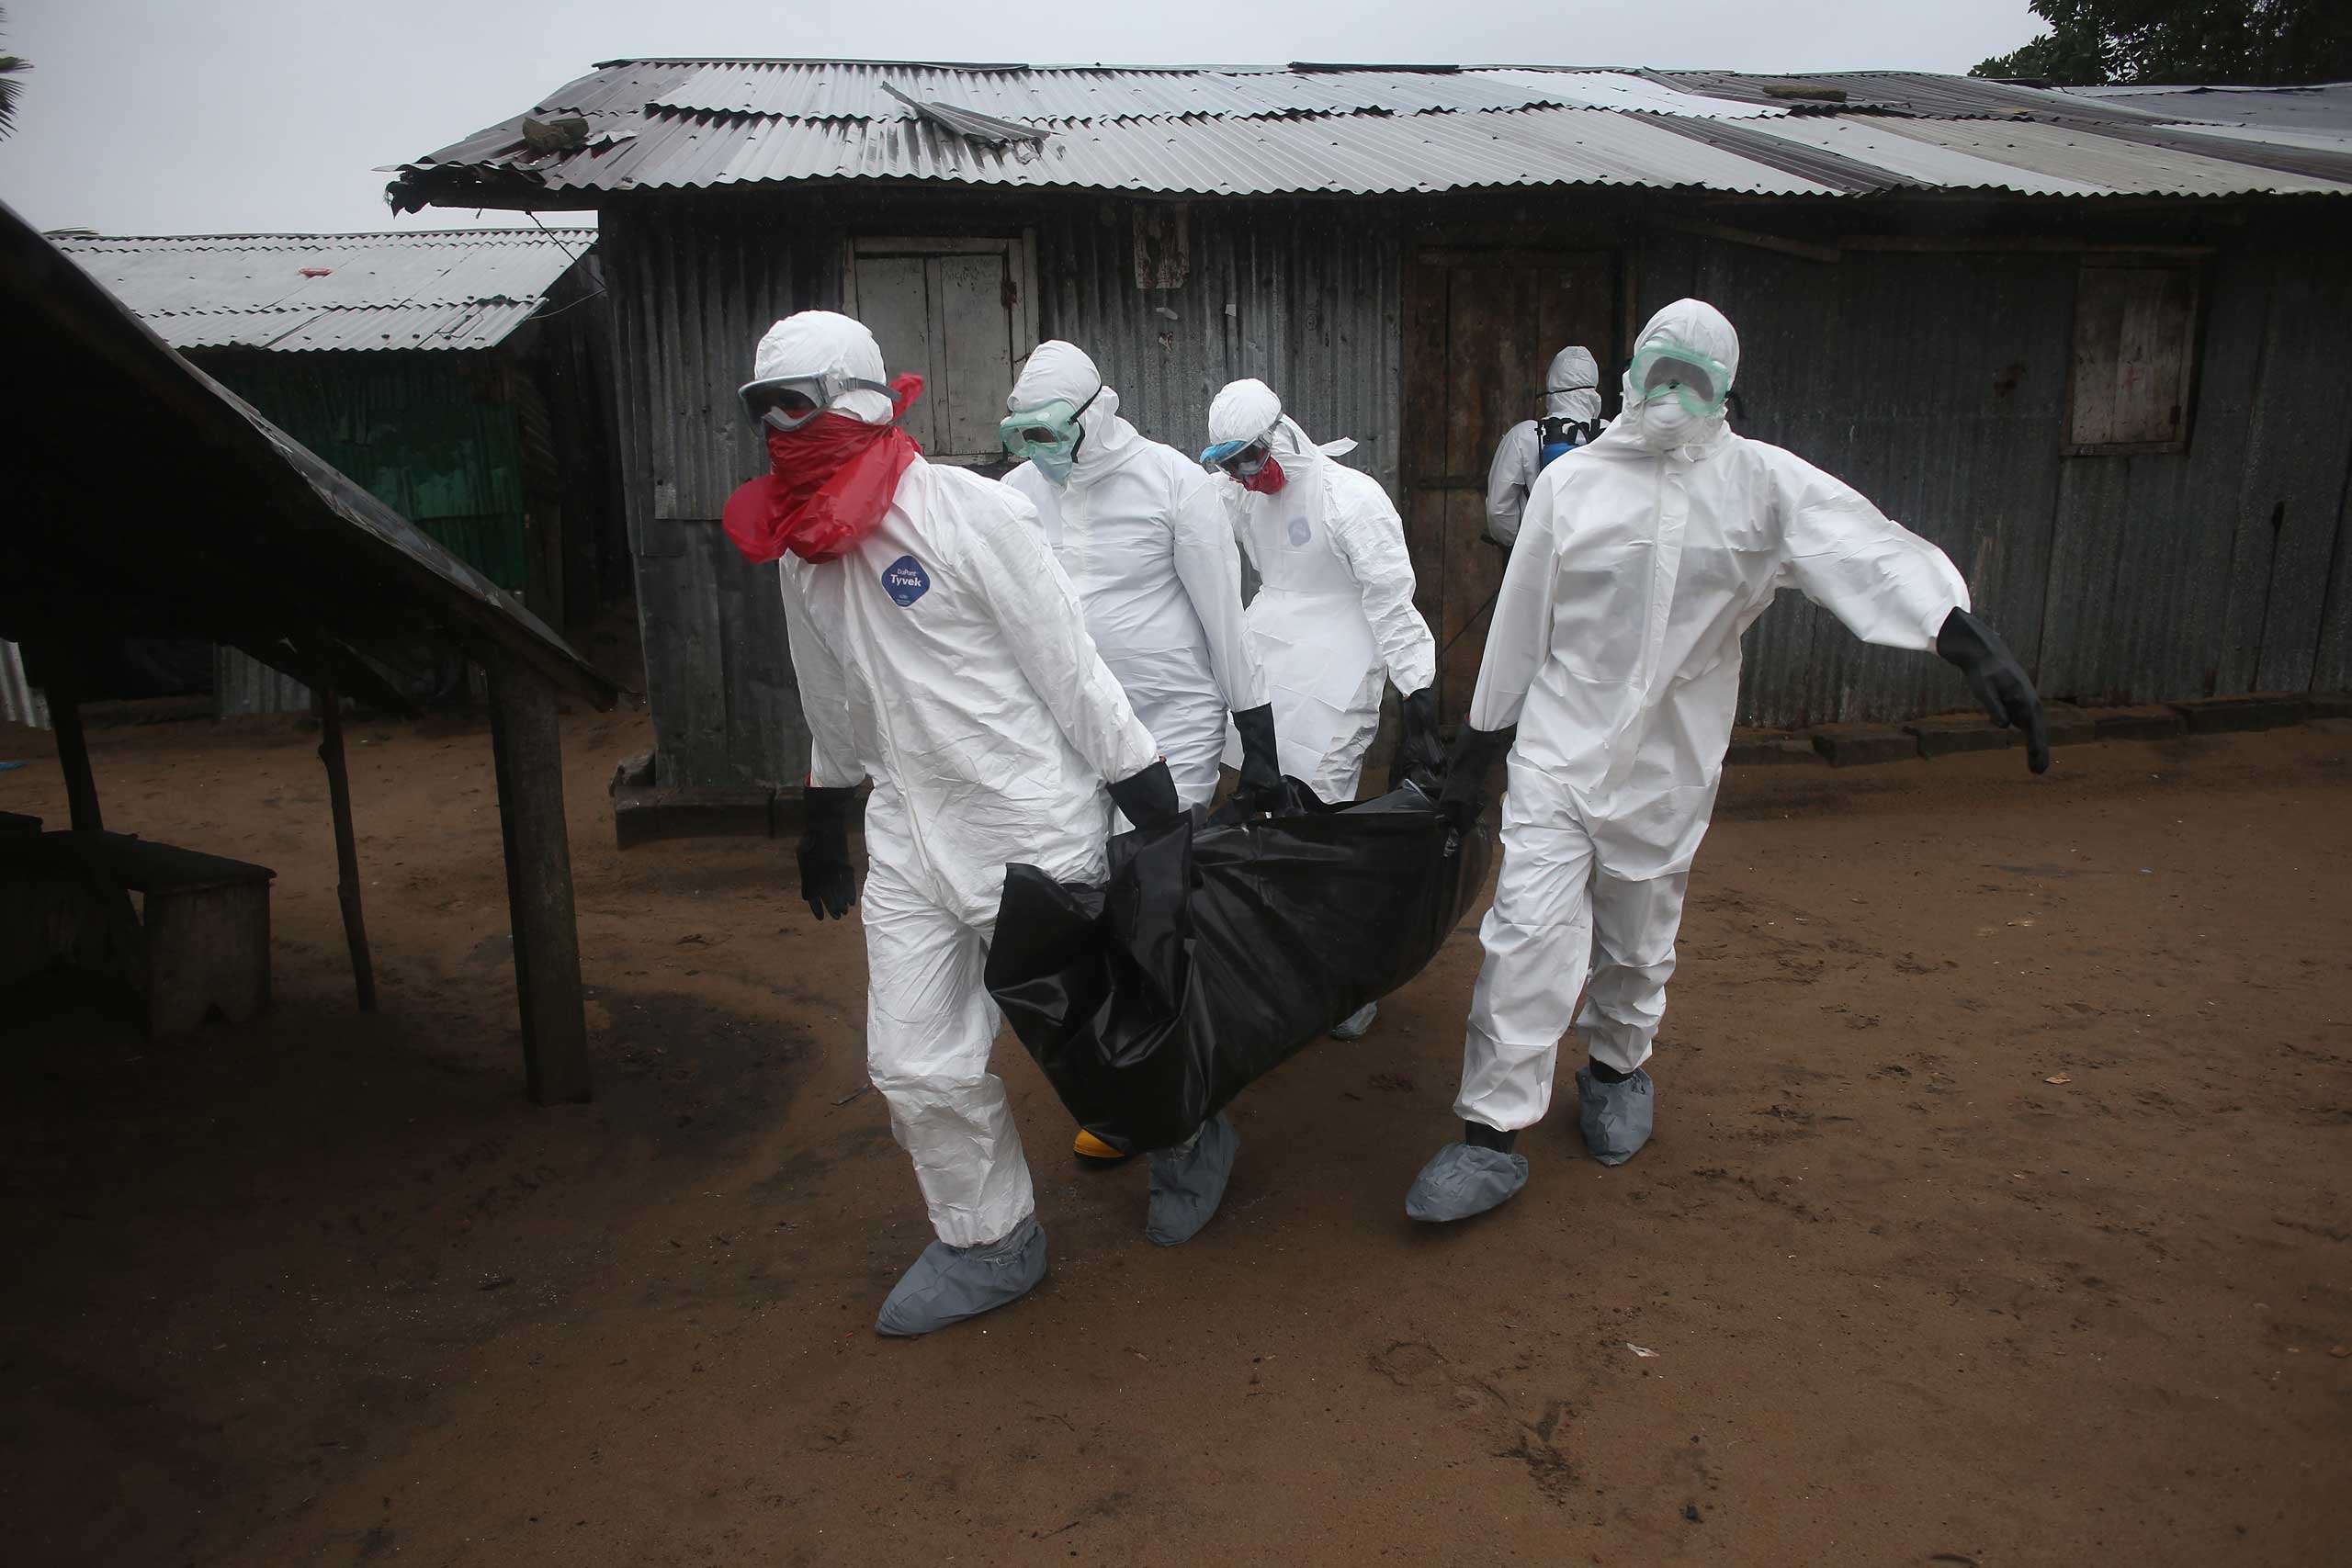 A Liberian burial team wearing protective clothing retrieves the body of a 60-year-old Ebola victim from his home on Aug. 17, 2014 near Monrovia. (John Moore&amp;mdash;Getty Images)